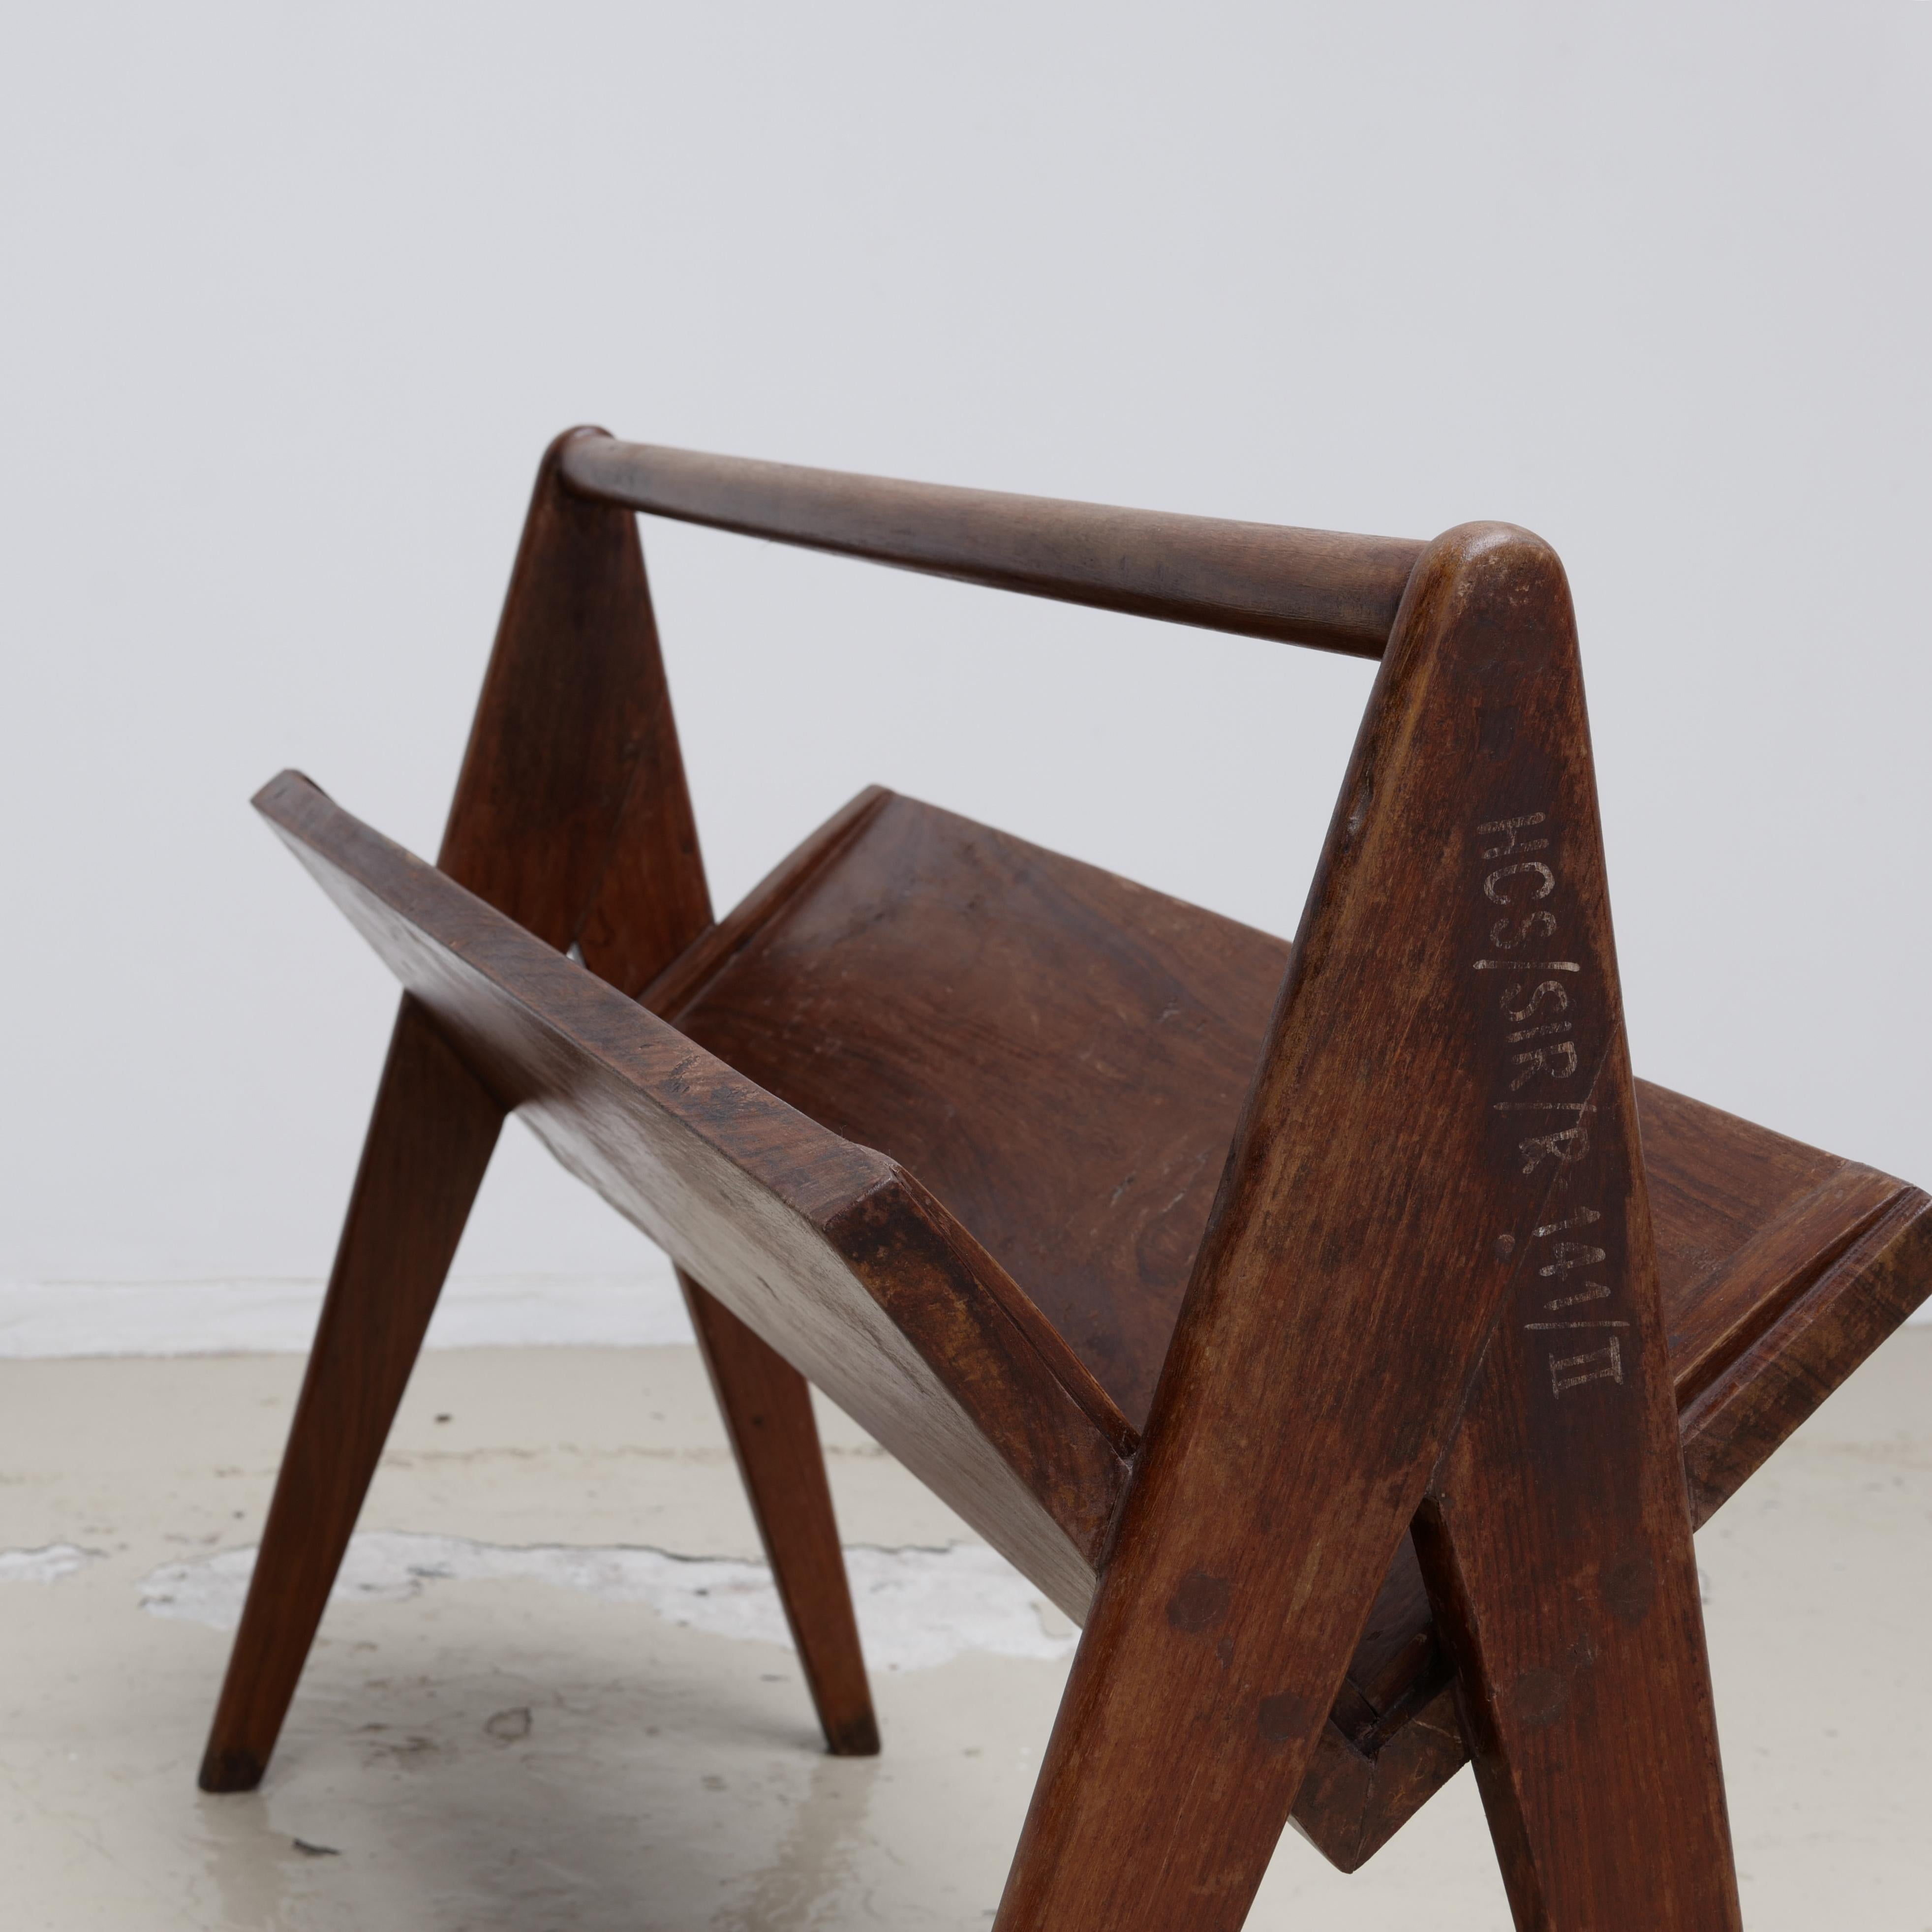 Designed by Pierre Jeanneret, this magazine rack was used in the High Court from Chandigarh, India.
It was actually used and is in generally good condition with some scratches.
Provenance:High Court, Chandigarh,India